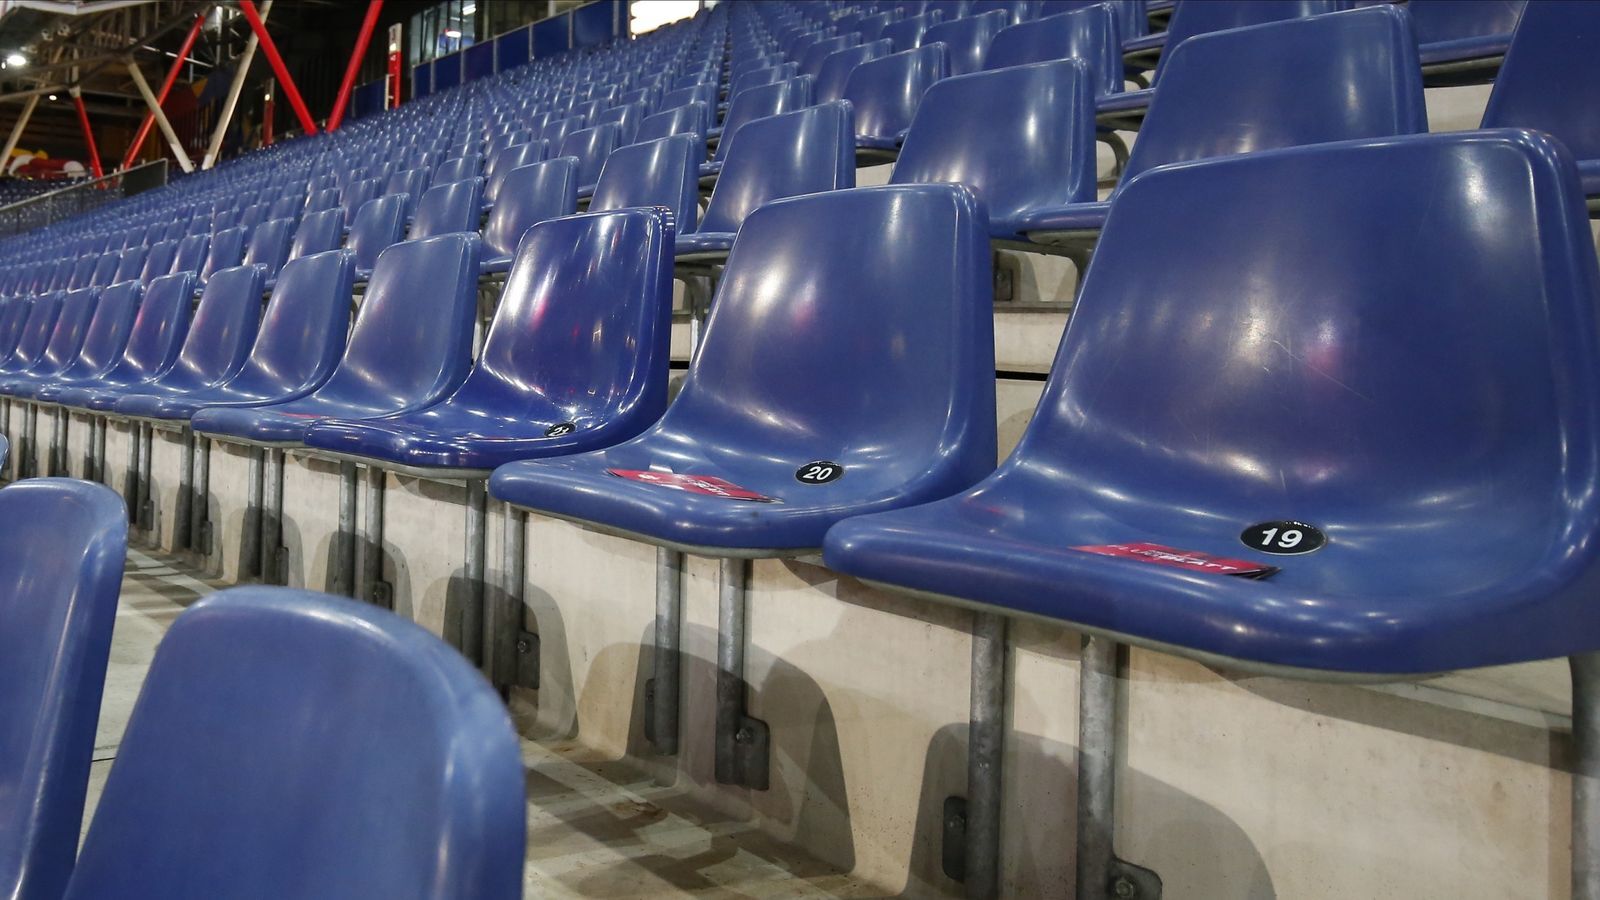 Champions League to Be Played without Fans in Portugal Stadiums